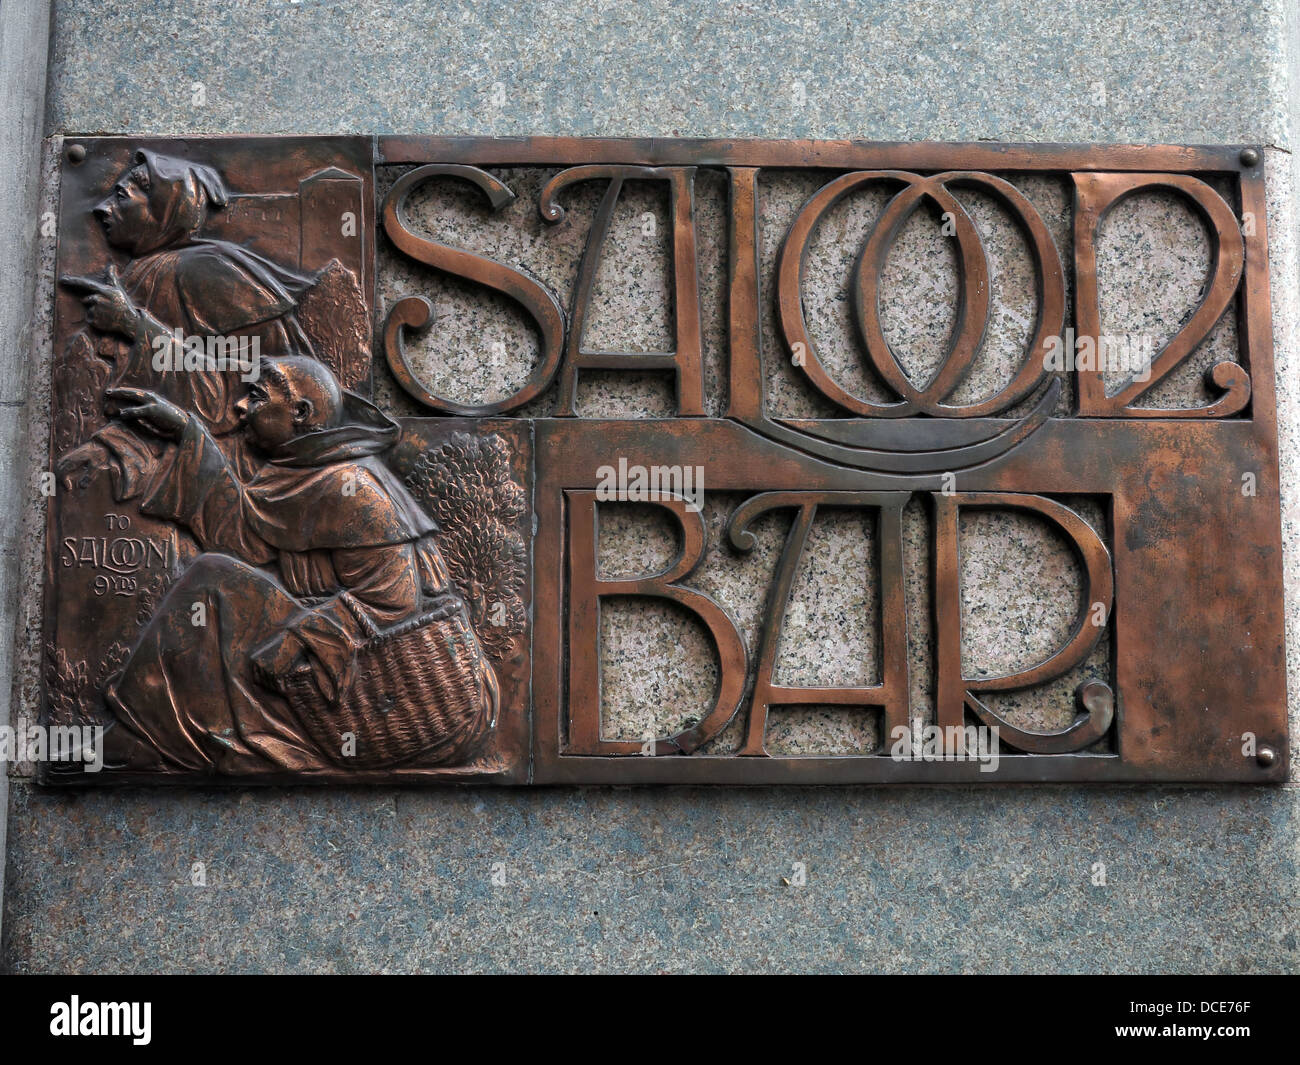 Saloon bar 9 ft 9ft engraved in copper plate, outside the historic Black Friar pub , Blackfriars London England UK Stock Photo